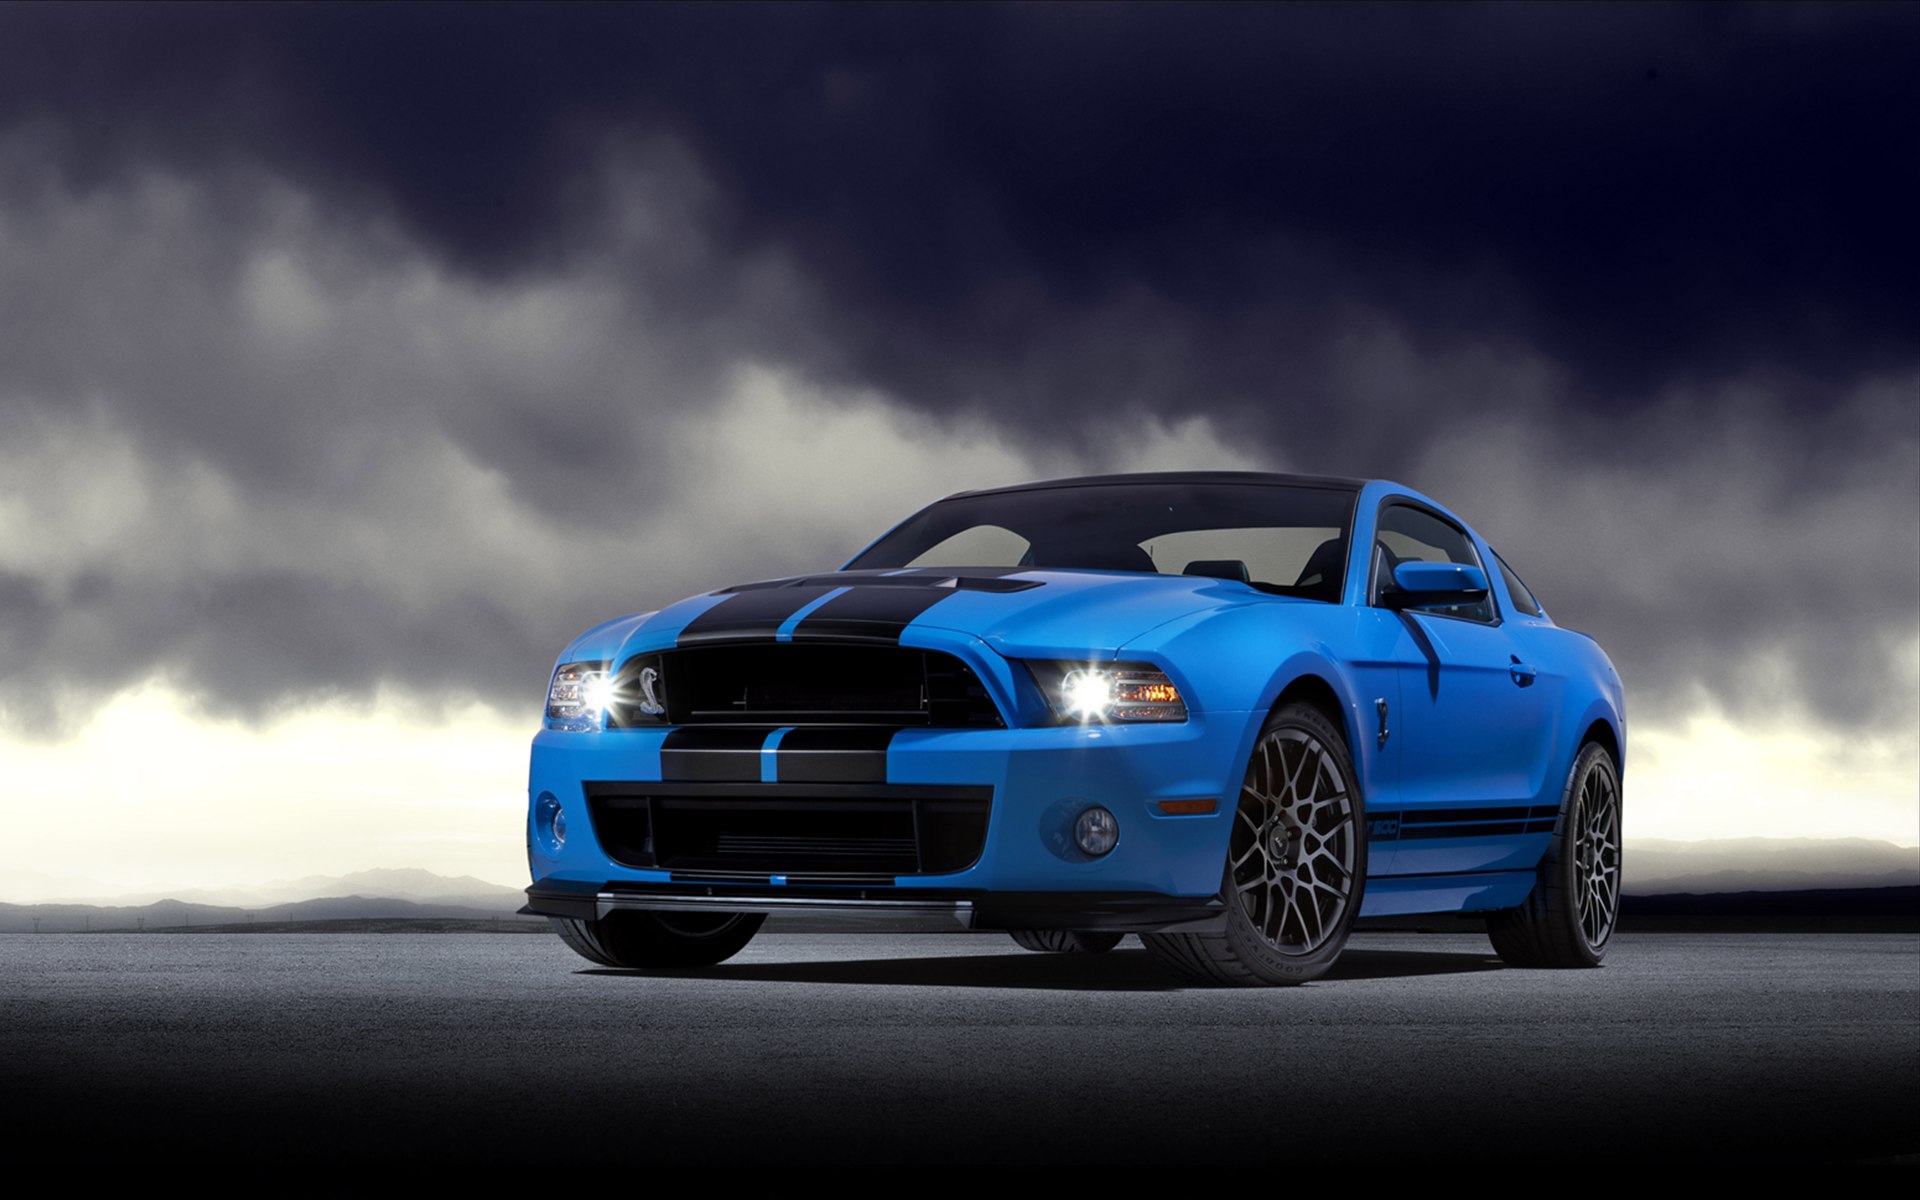 2014 Ford Shelby Mustang Gt500 - HD Wallpaper 